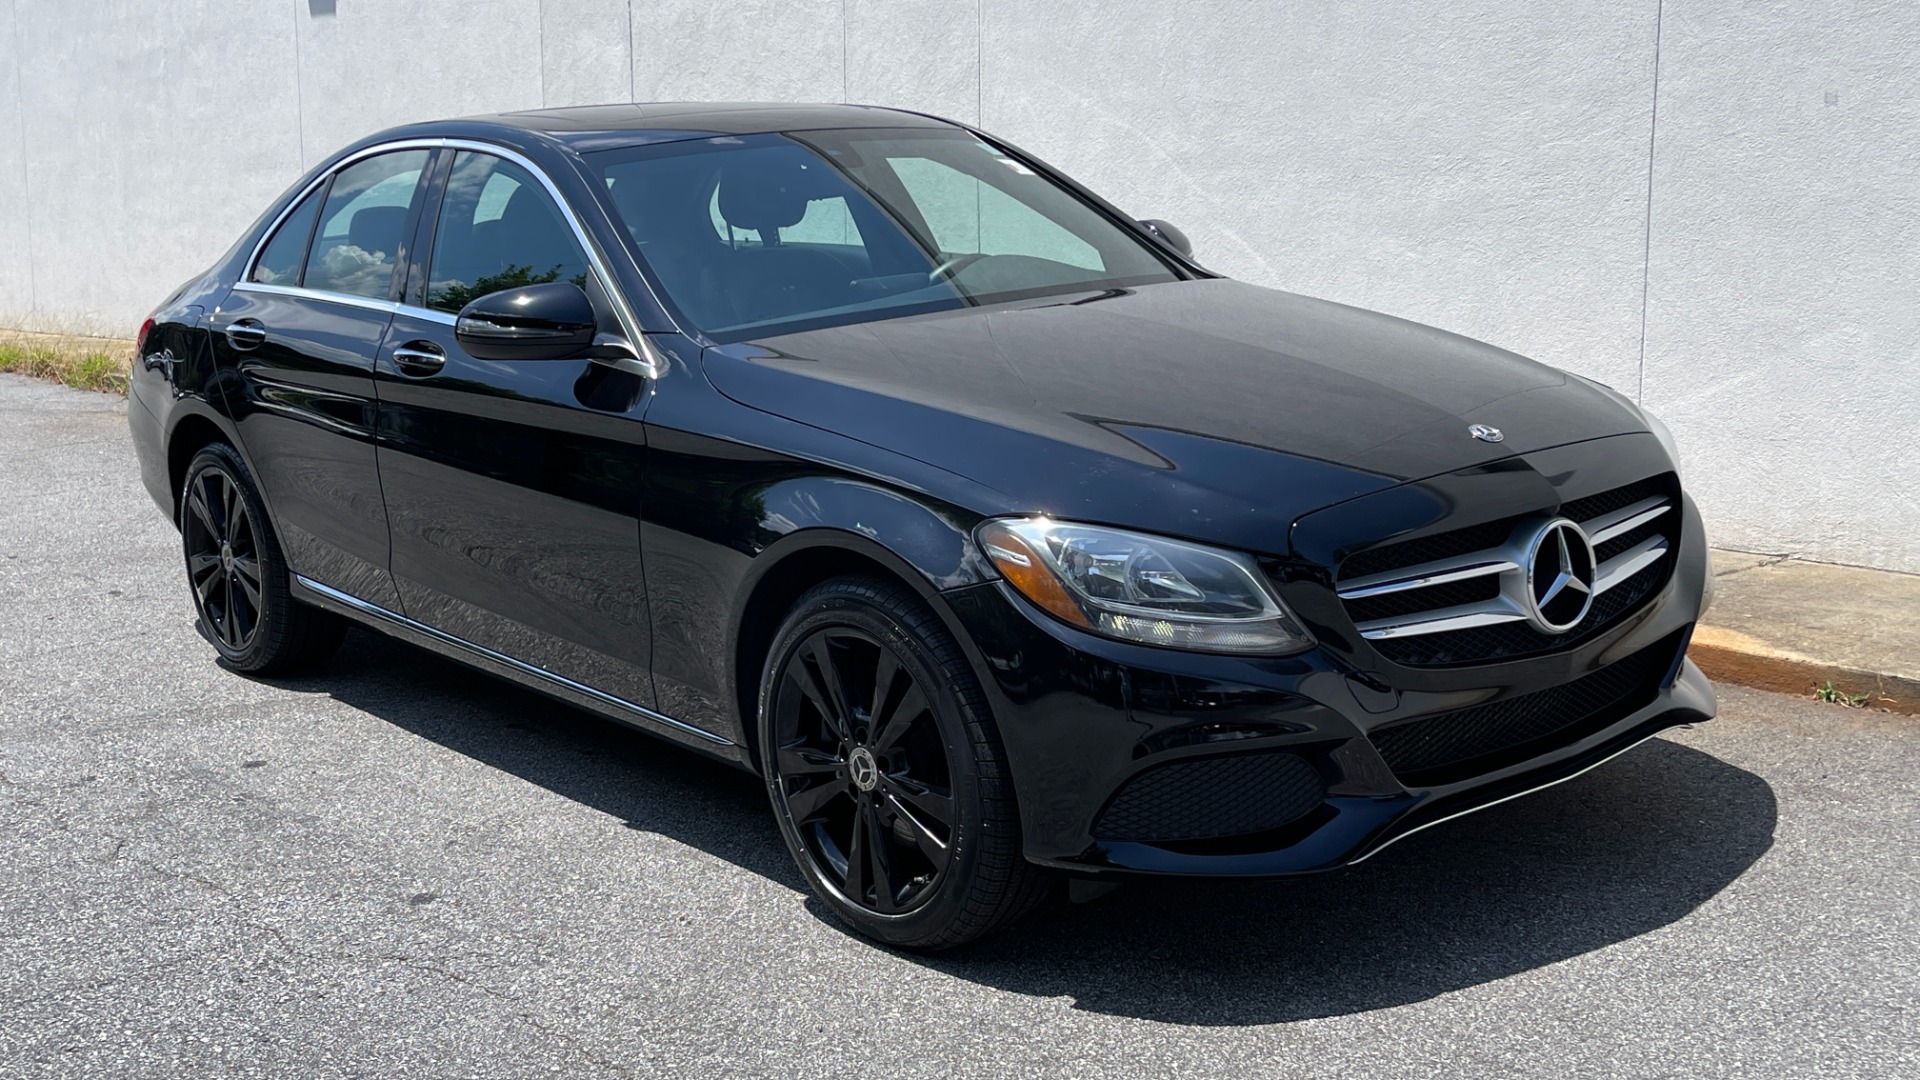 Used 2018 Mercedes-Benz C-Class C 300 / PREMIUM / REVIEW CAM / HTD SEATS / 18IN WHEELS for sale $31,295 at Formula Imports in Charlotte NC 28227 3